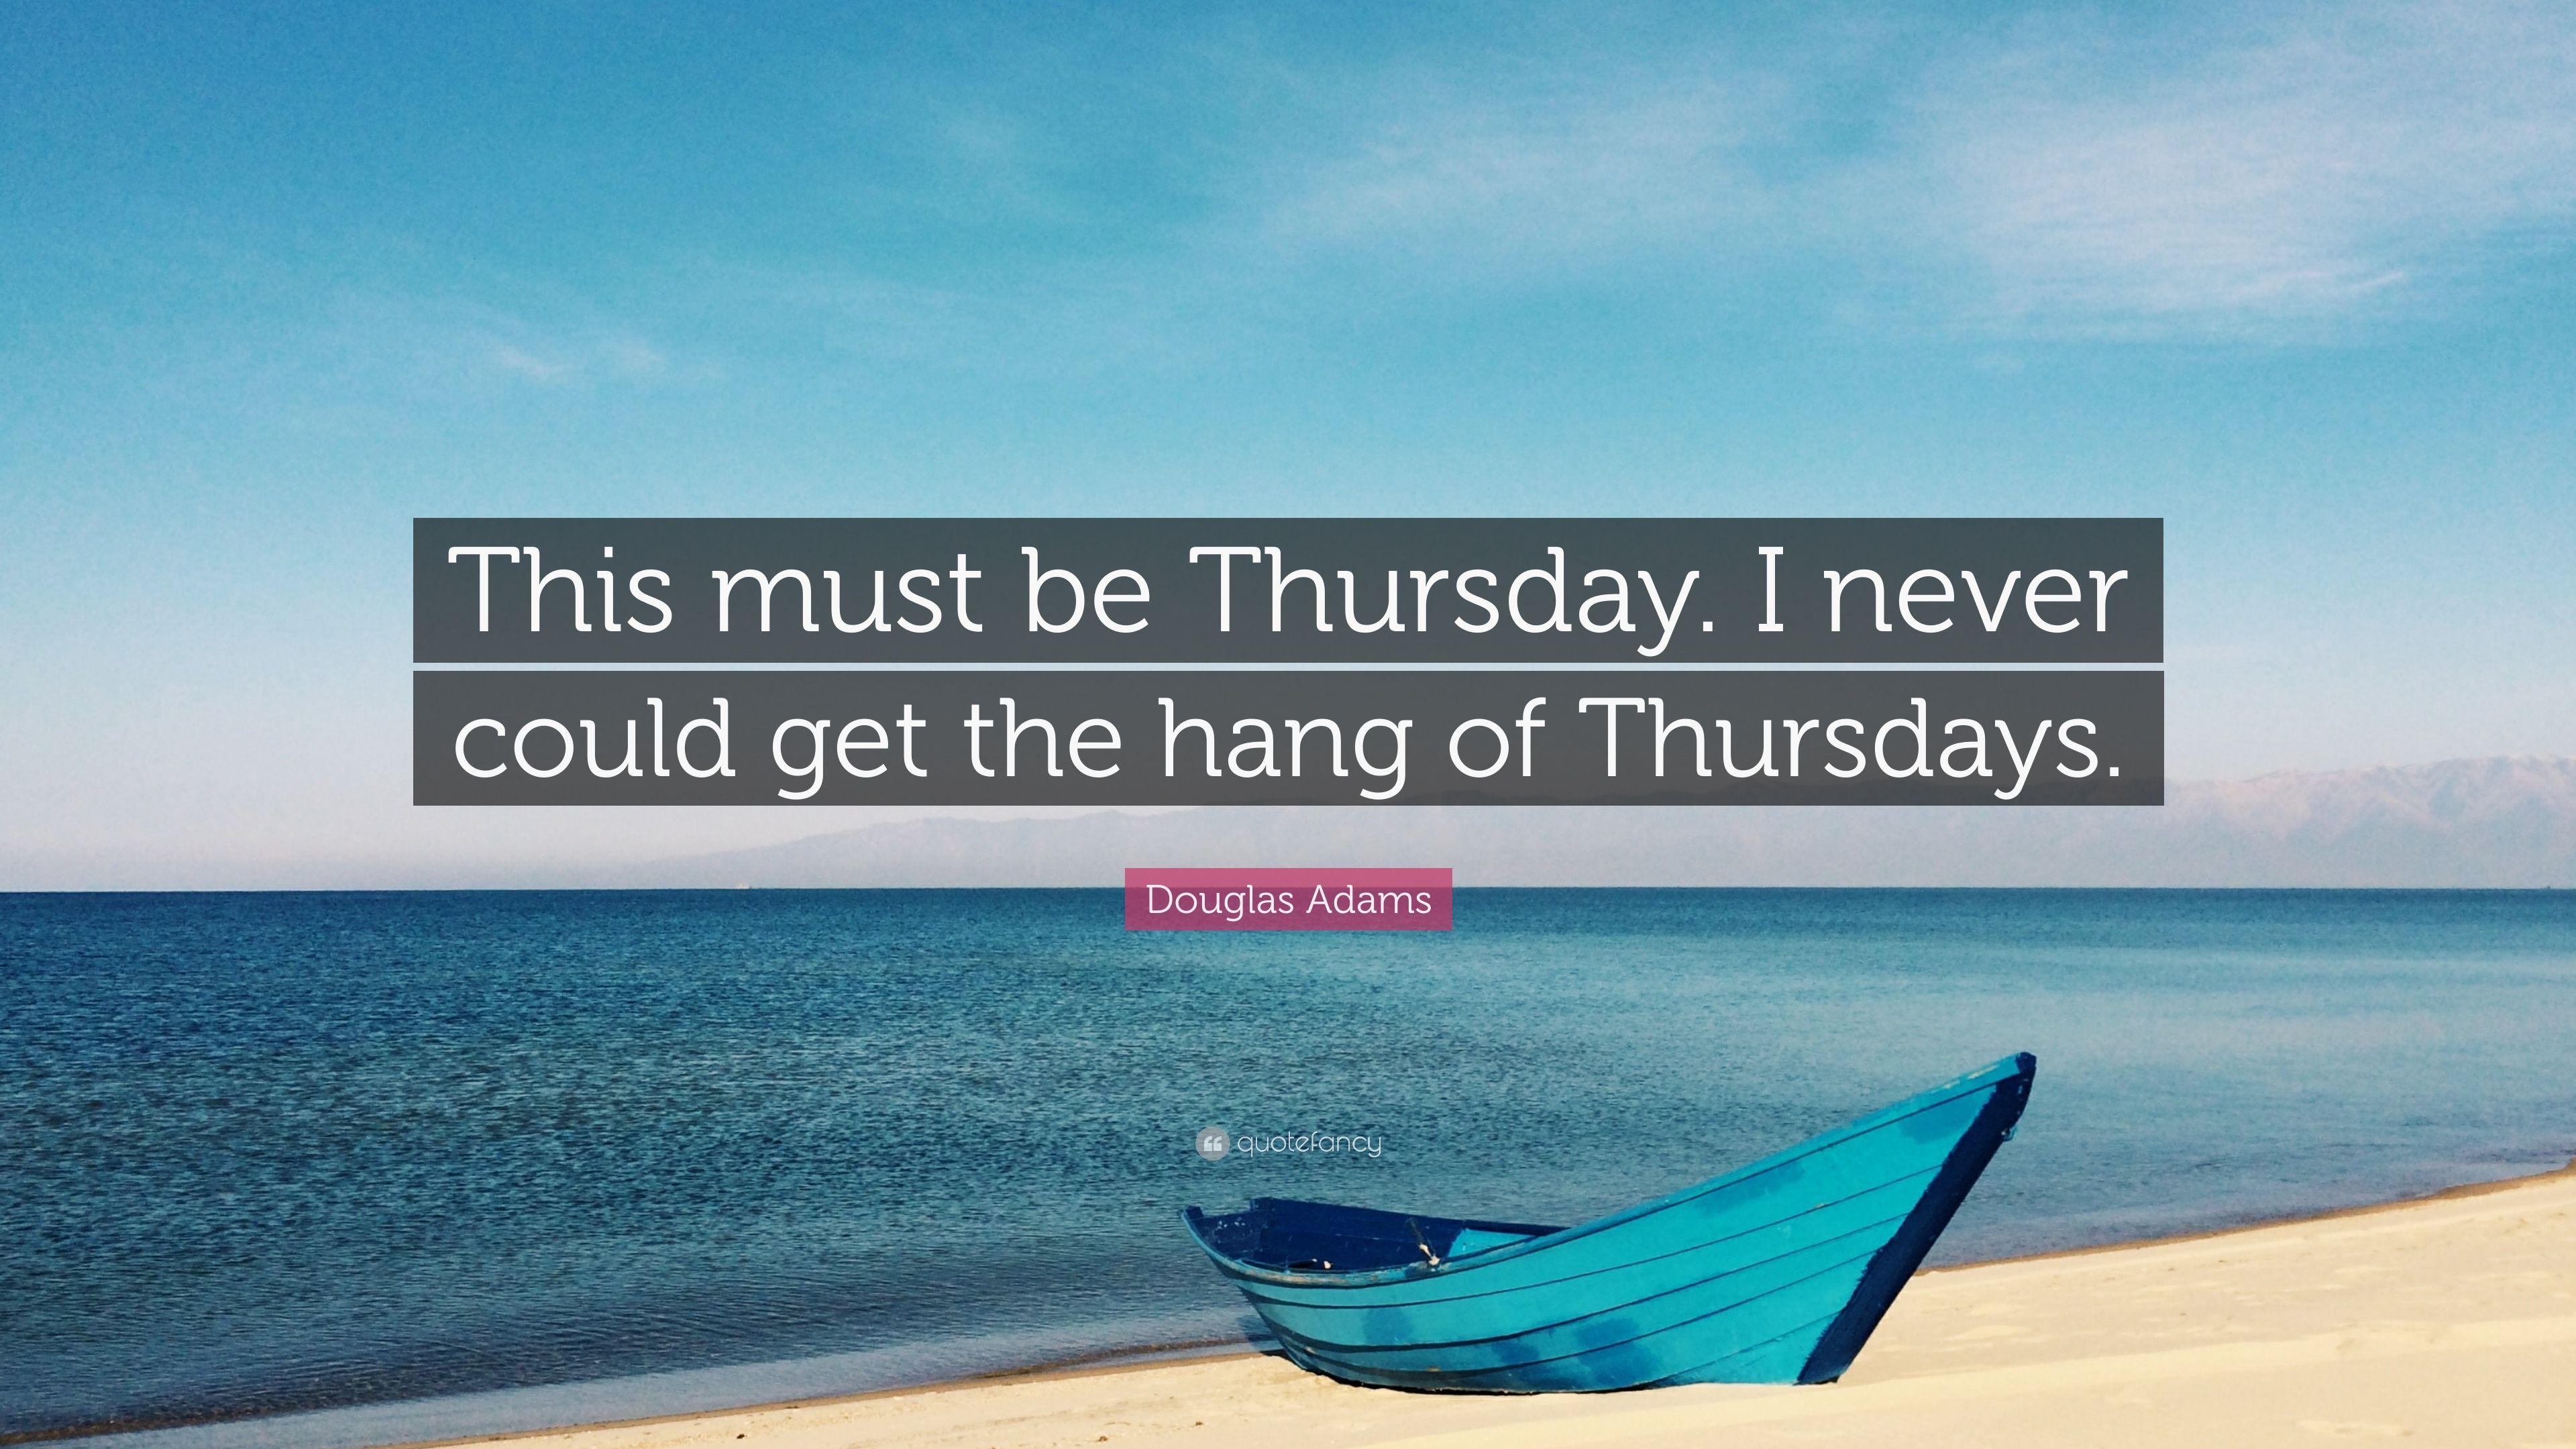 Douglas Adams Quote: “This must be Thursday. I never could get